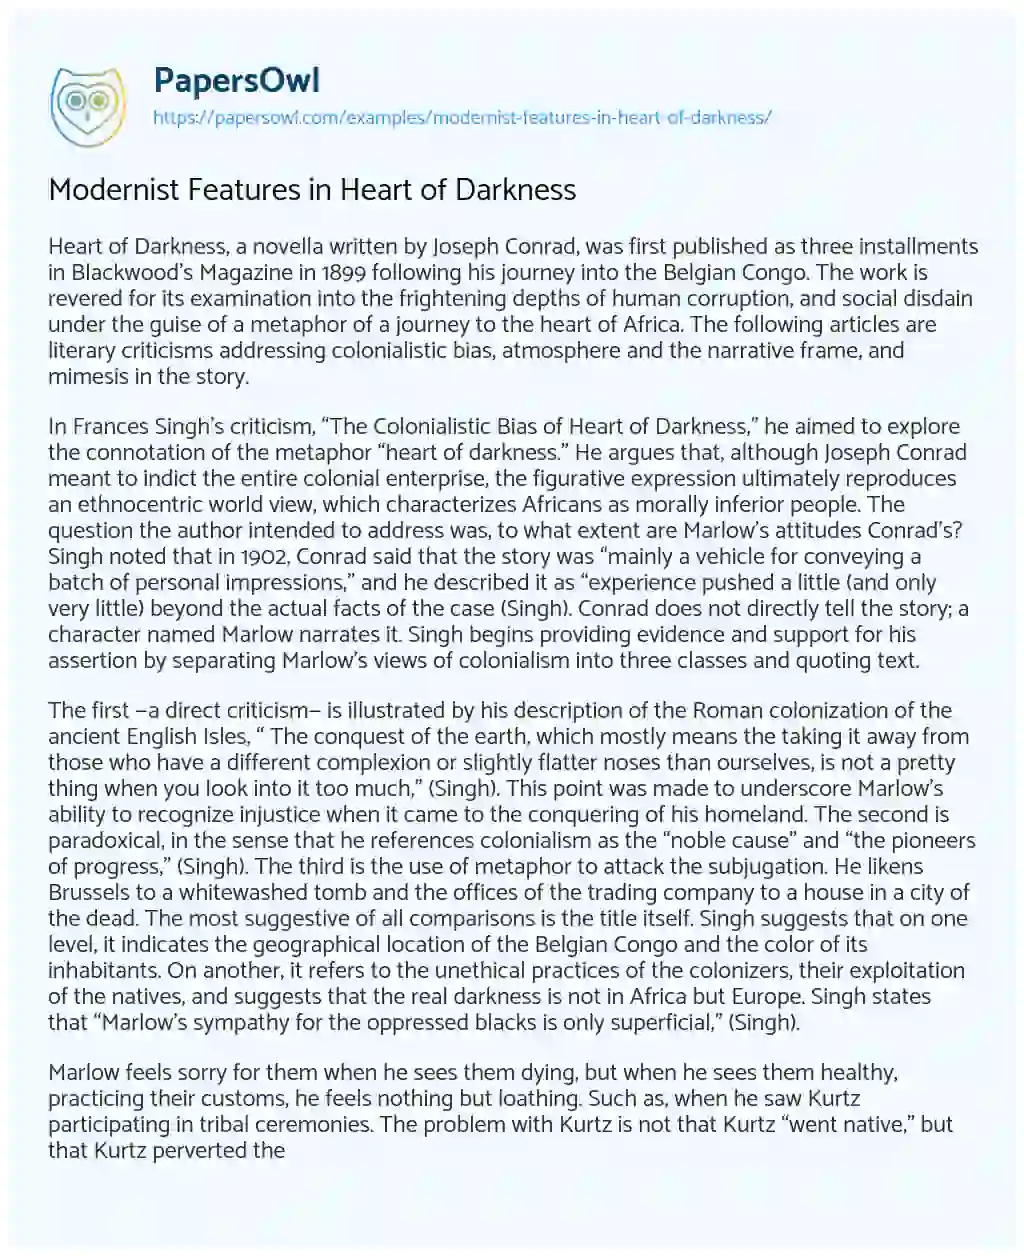 Essay on Modernist Features in Heart of Darkness